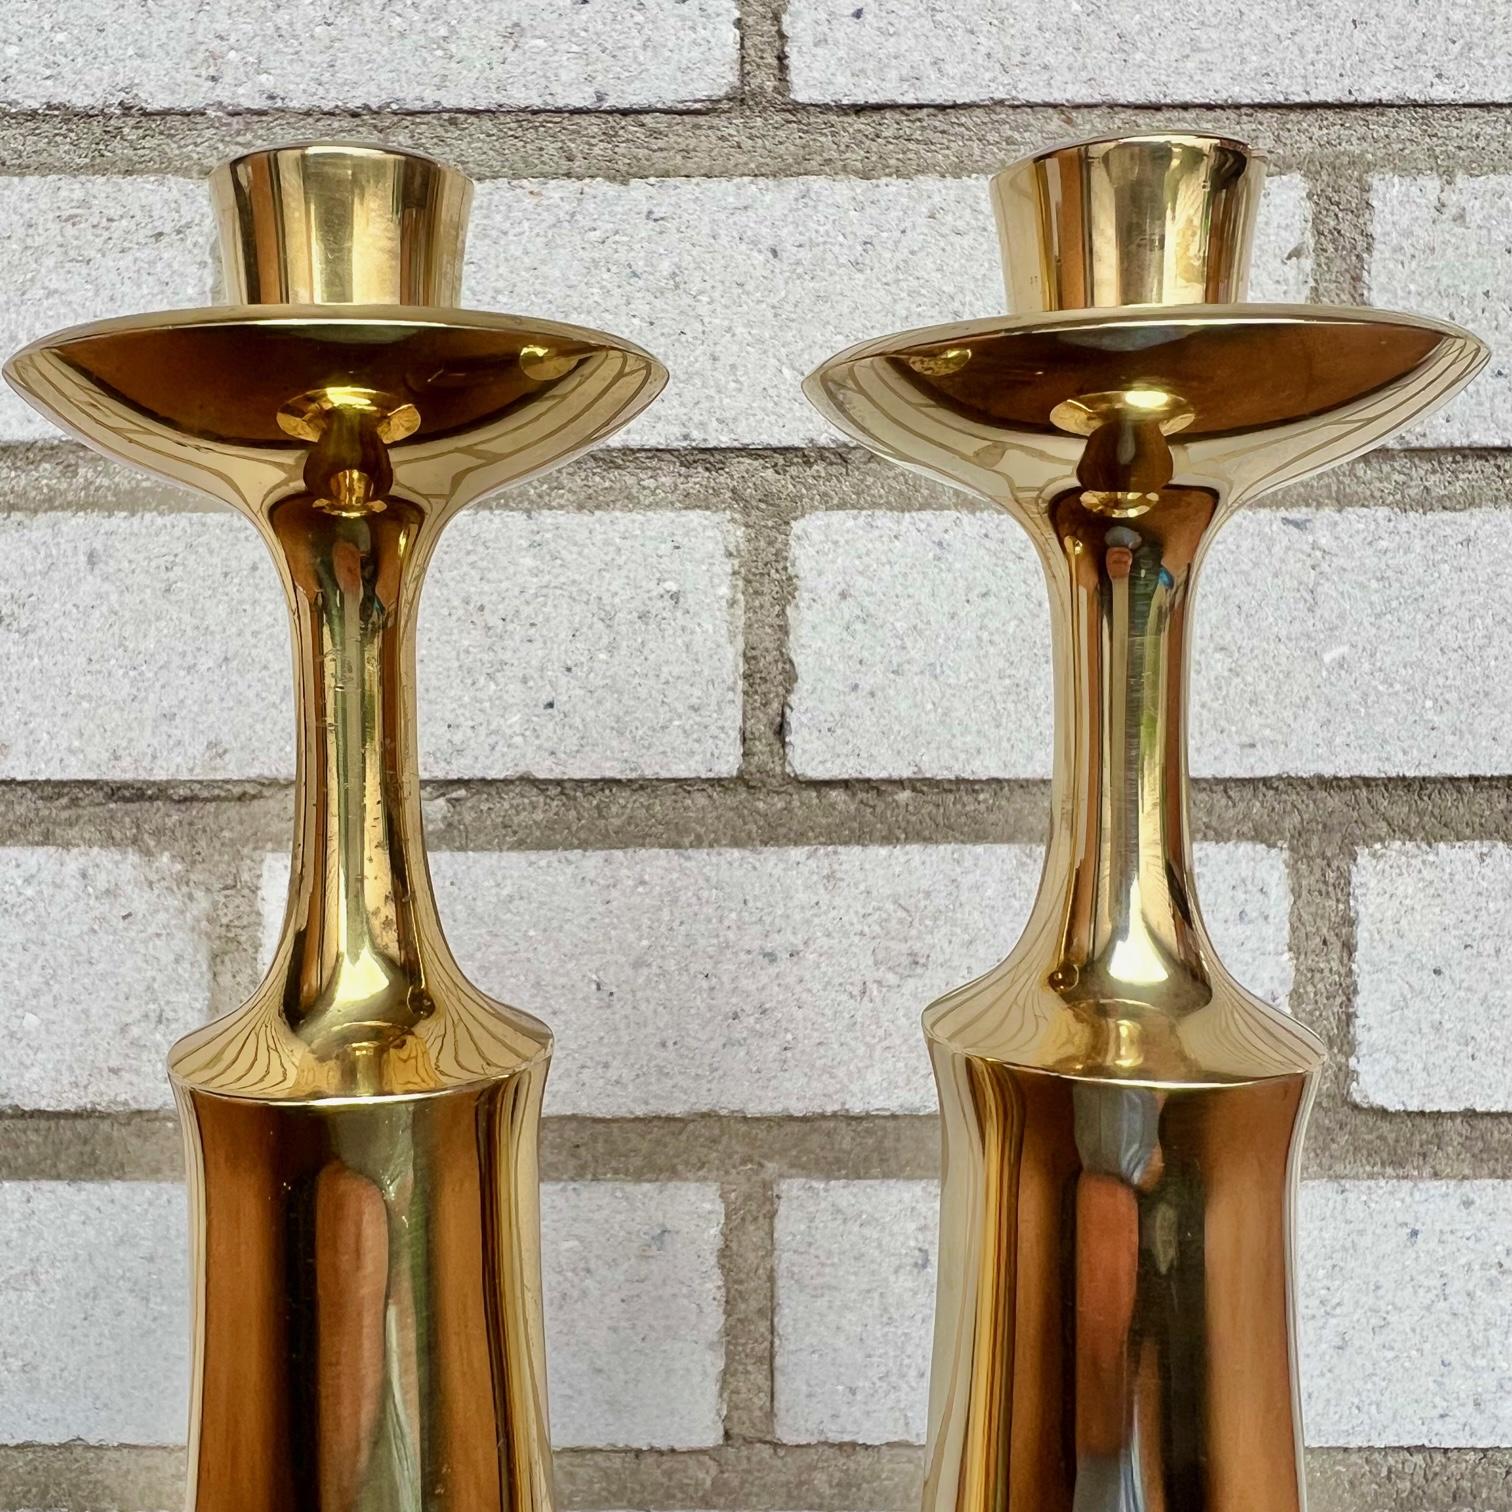 Mid-20th Century Candle Sticks in Brass by Jens Harald Quistgaard for Dansk Designs, 1950s For Sale